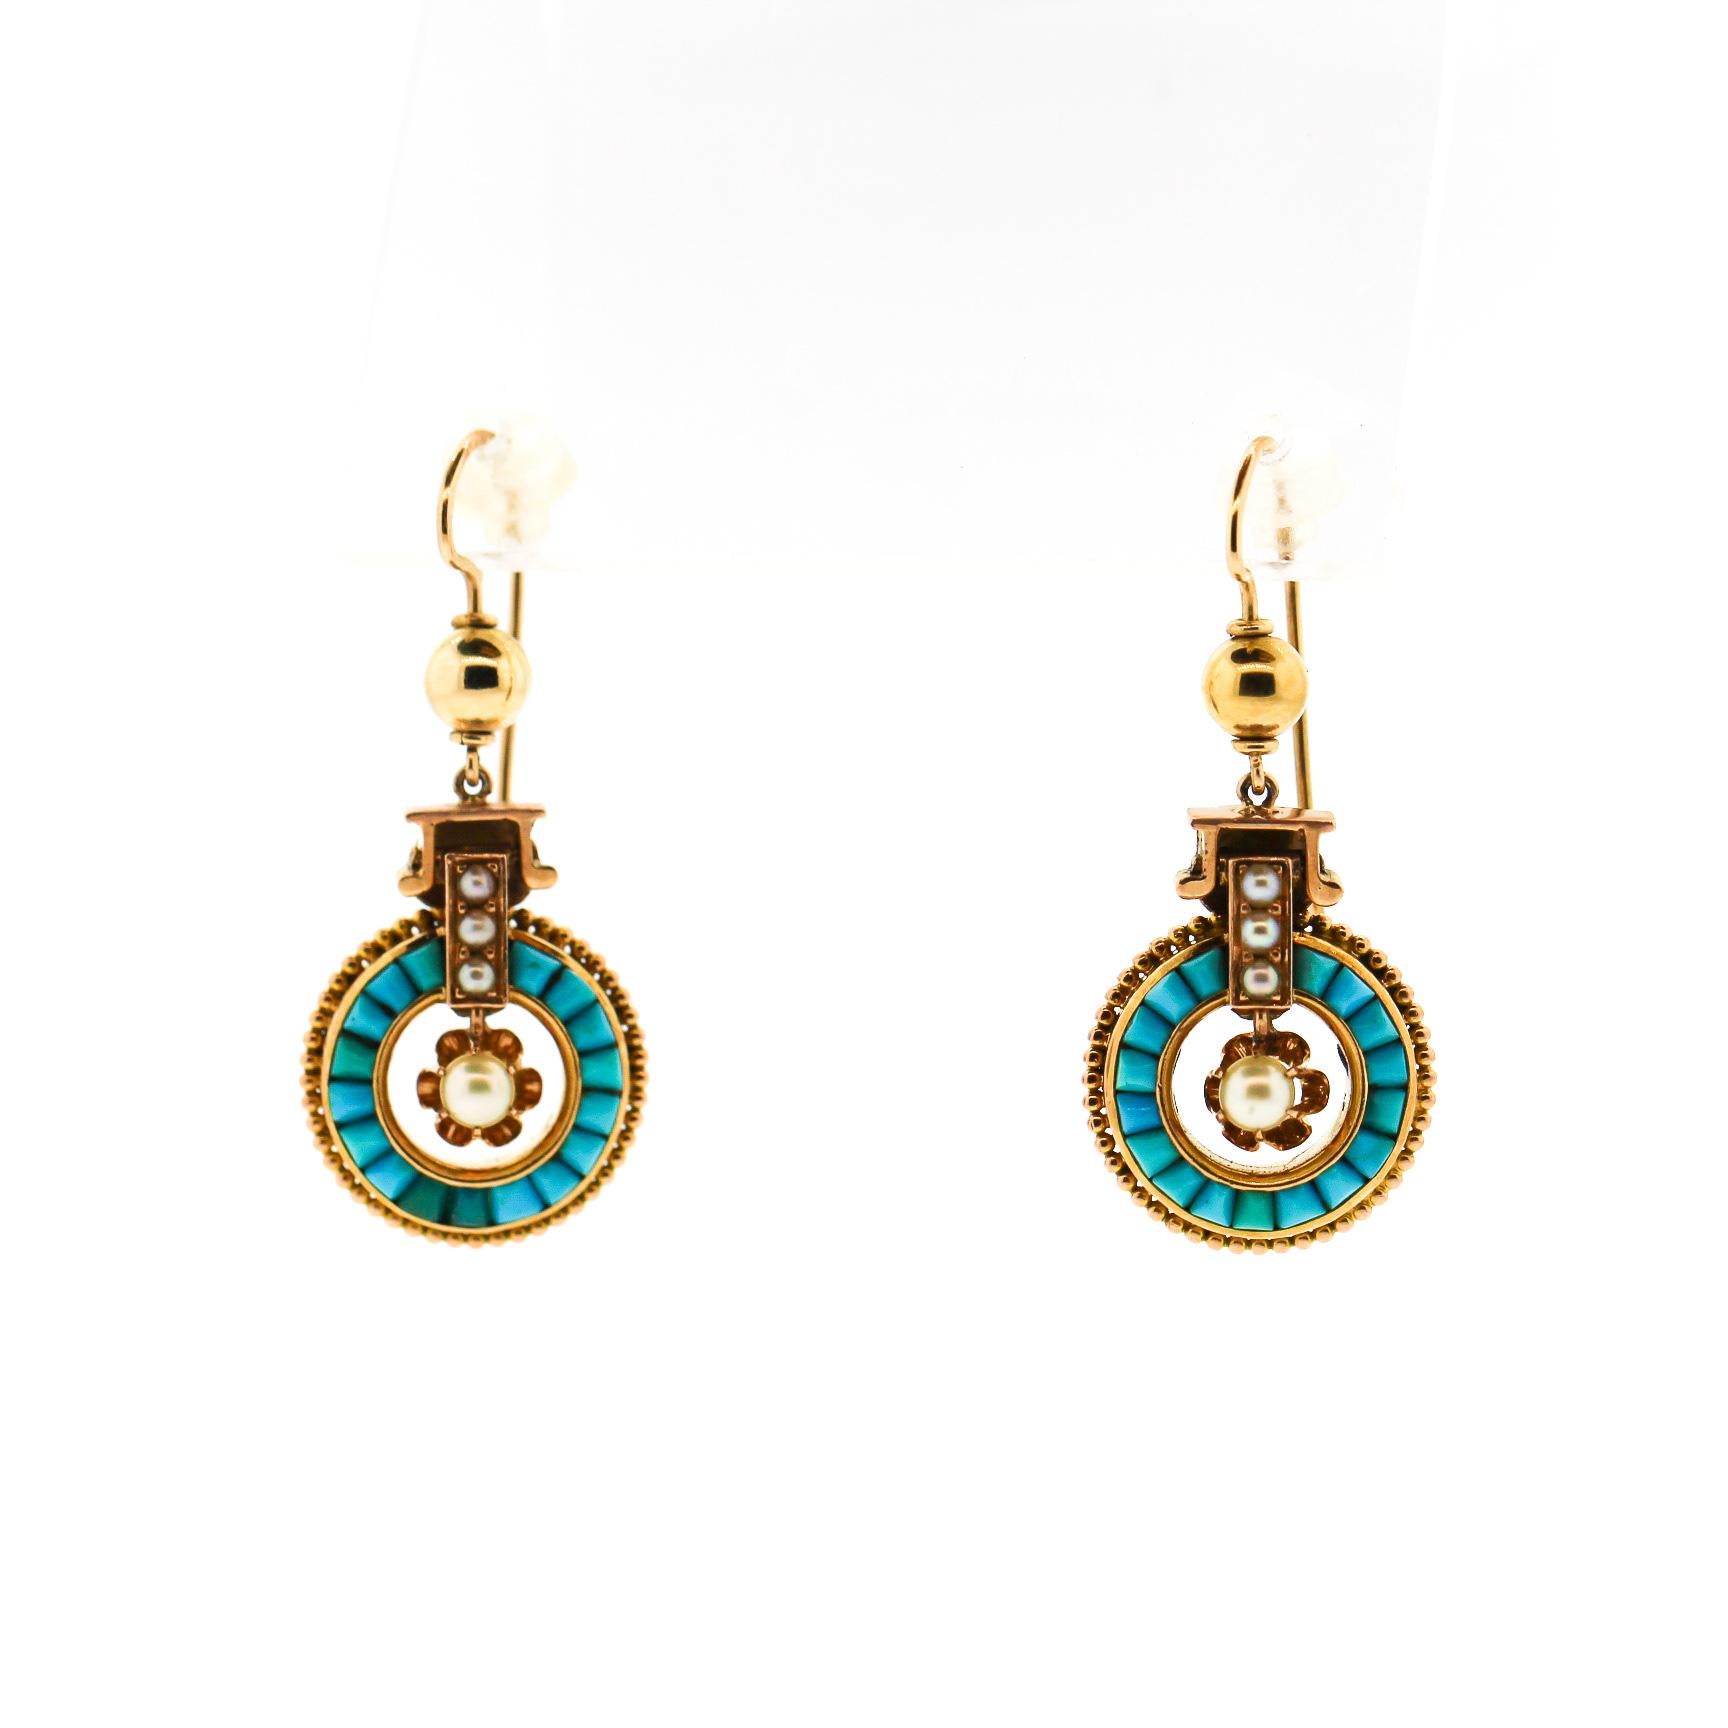 Antique 14 Karat Gold Seed Pearl and Calibre Turquoise Pendant Earrings